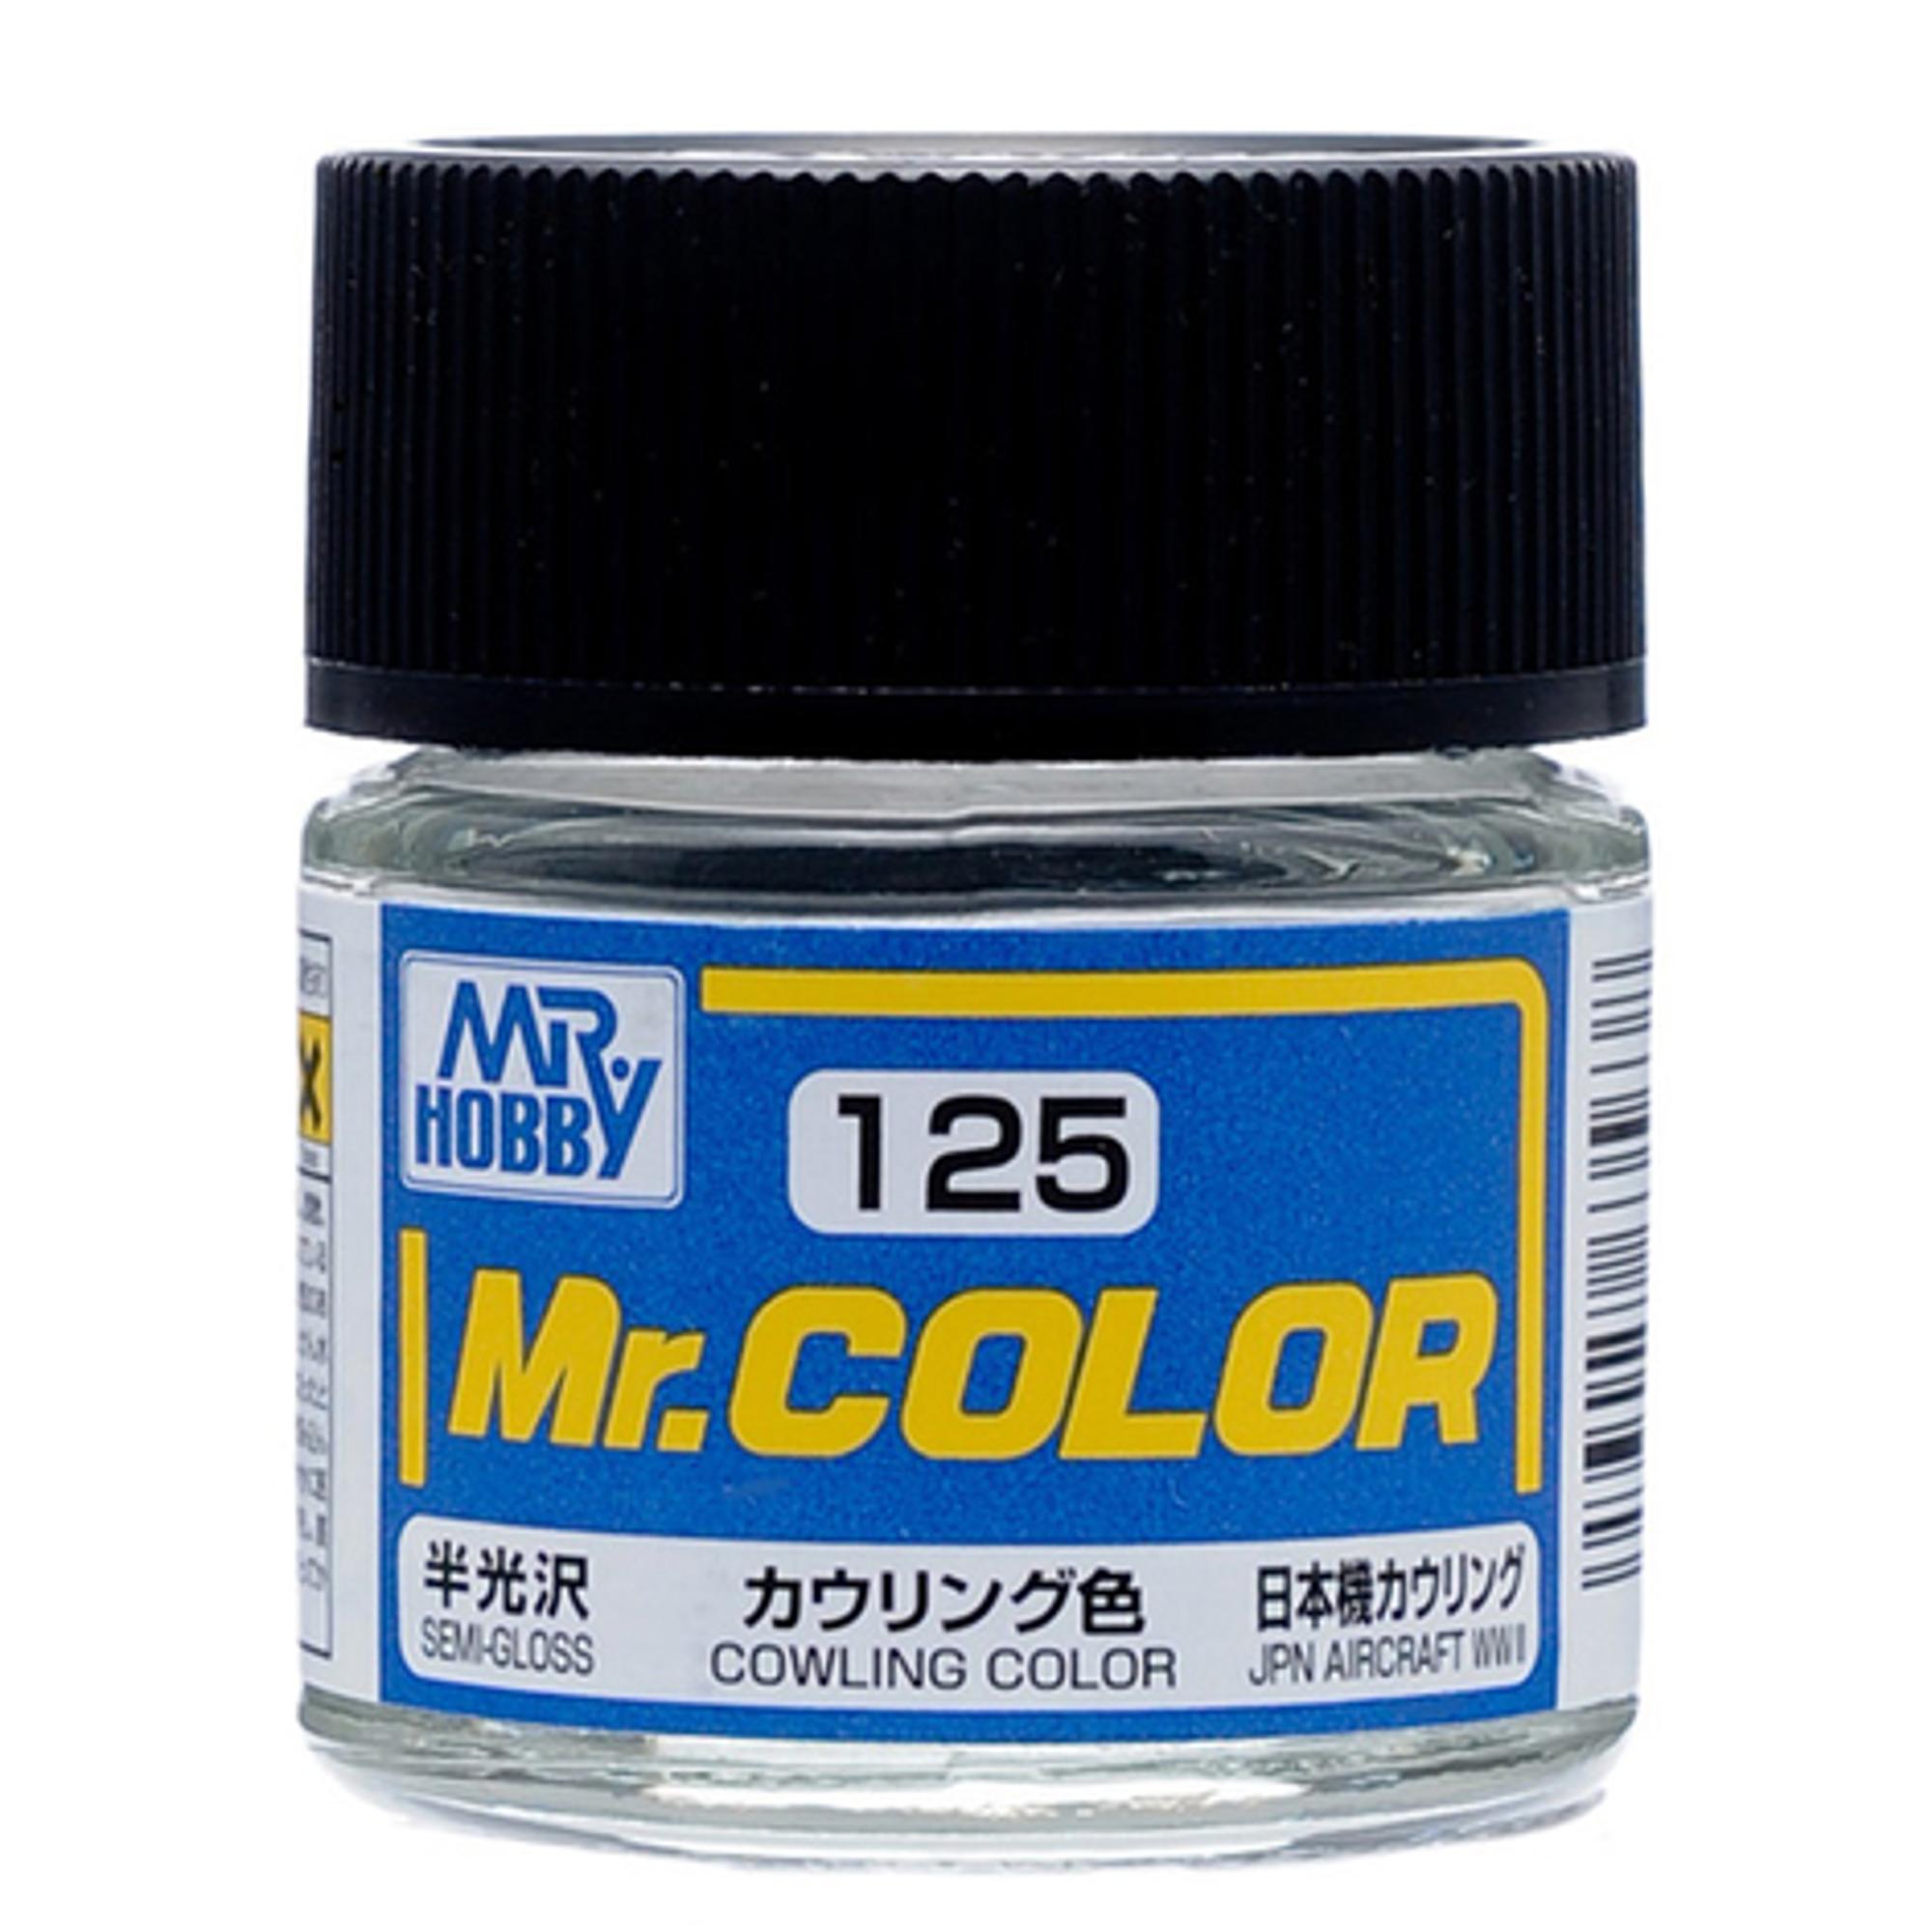 Mr. Hobby Mr. Color Semi-Gloss Cowling Color (IJN) Paint